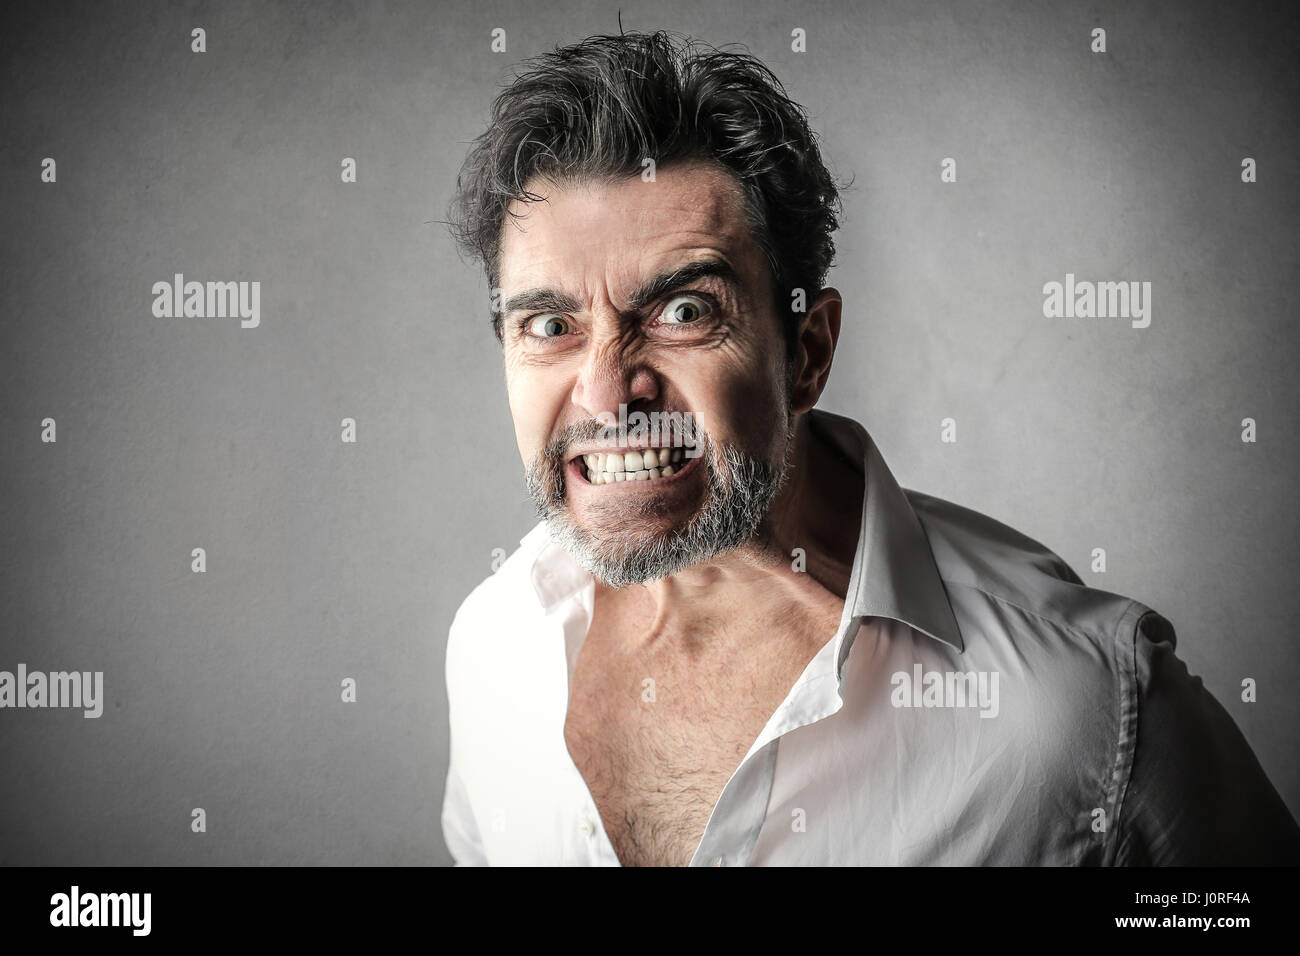 Man being angry Stock Photo